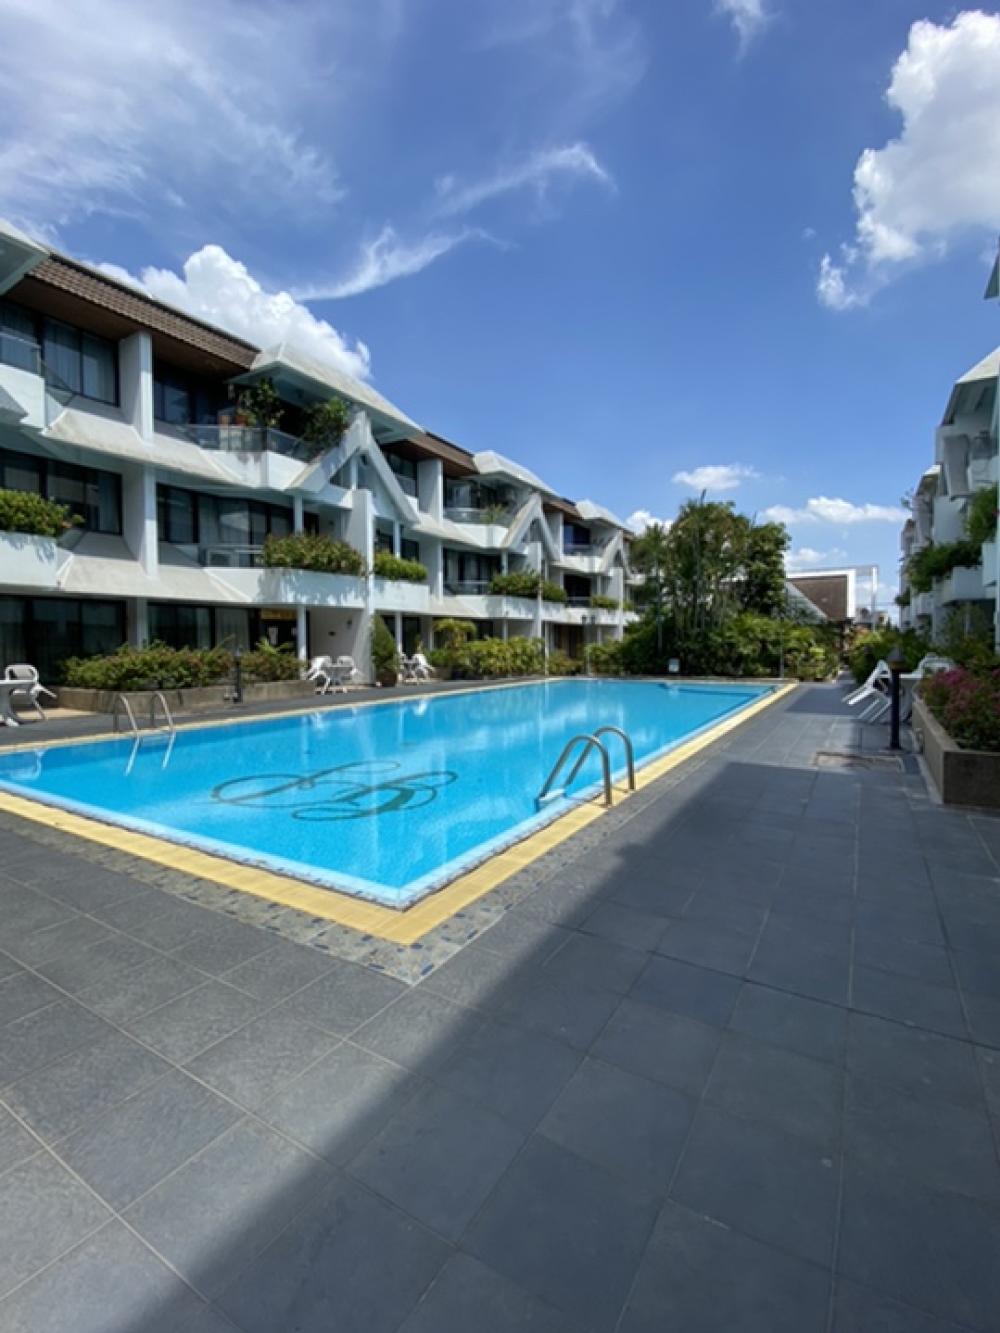 For RentTownhouseChokchai 4, Ladprao 71, Ladprao 48, : Town Home with Garden and Pool View for Rent Ladprao/Suthisarn Area